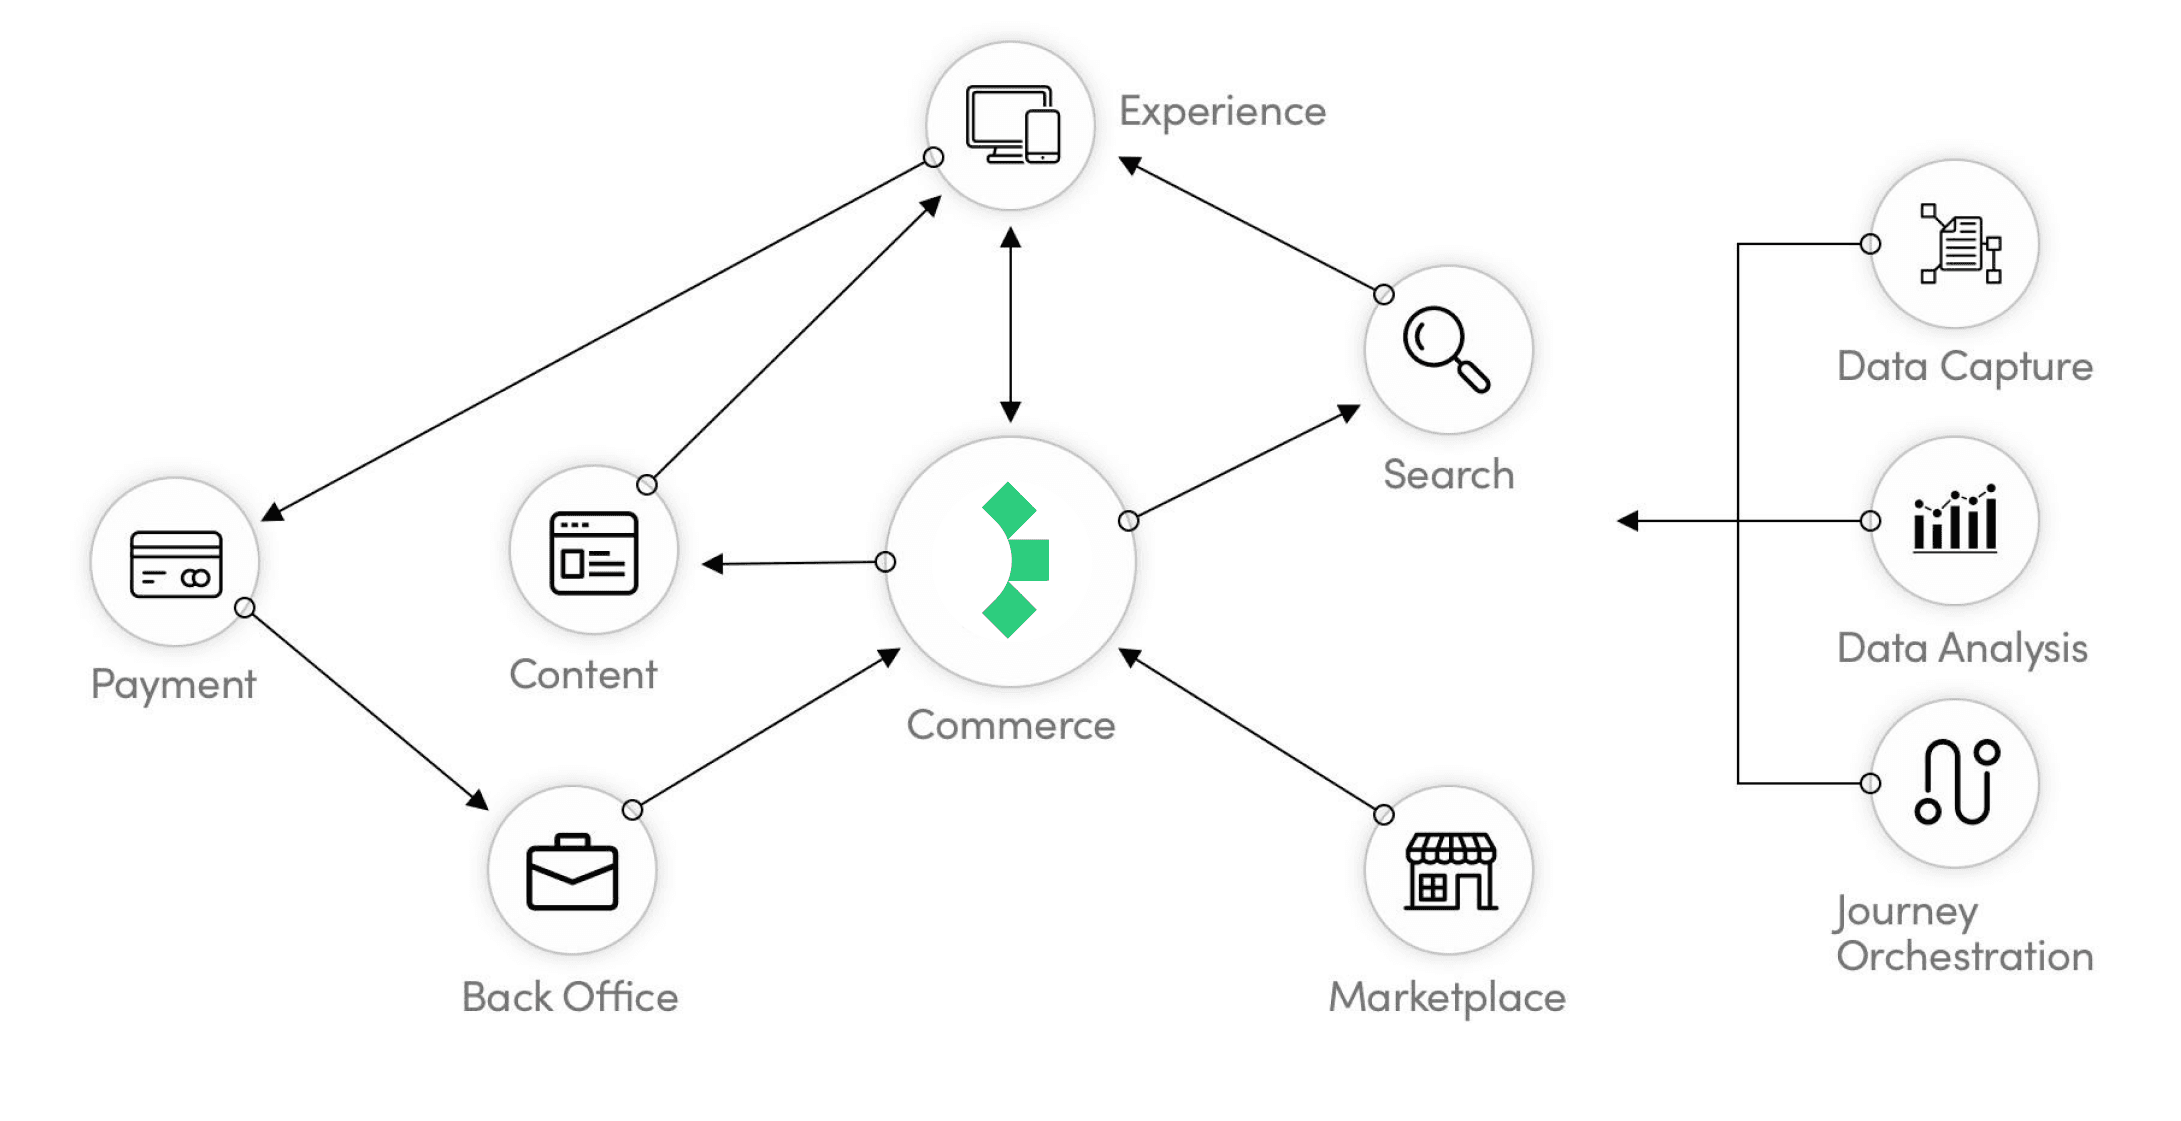 Diagram of how Elastic Path connects with content, experience, search, payment, back office, marketplace, data, and journey.